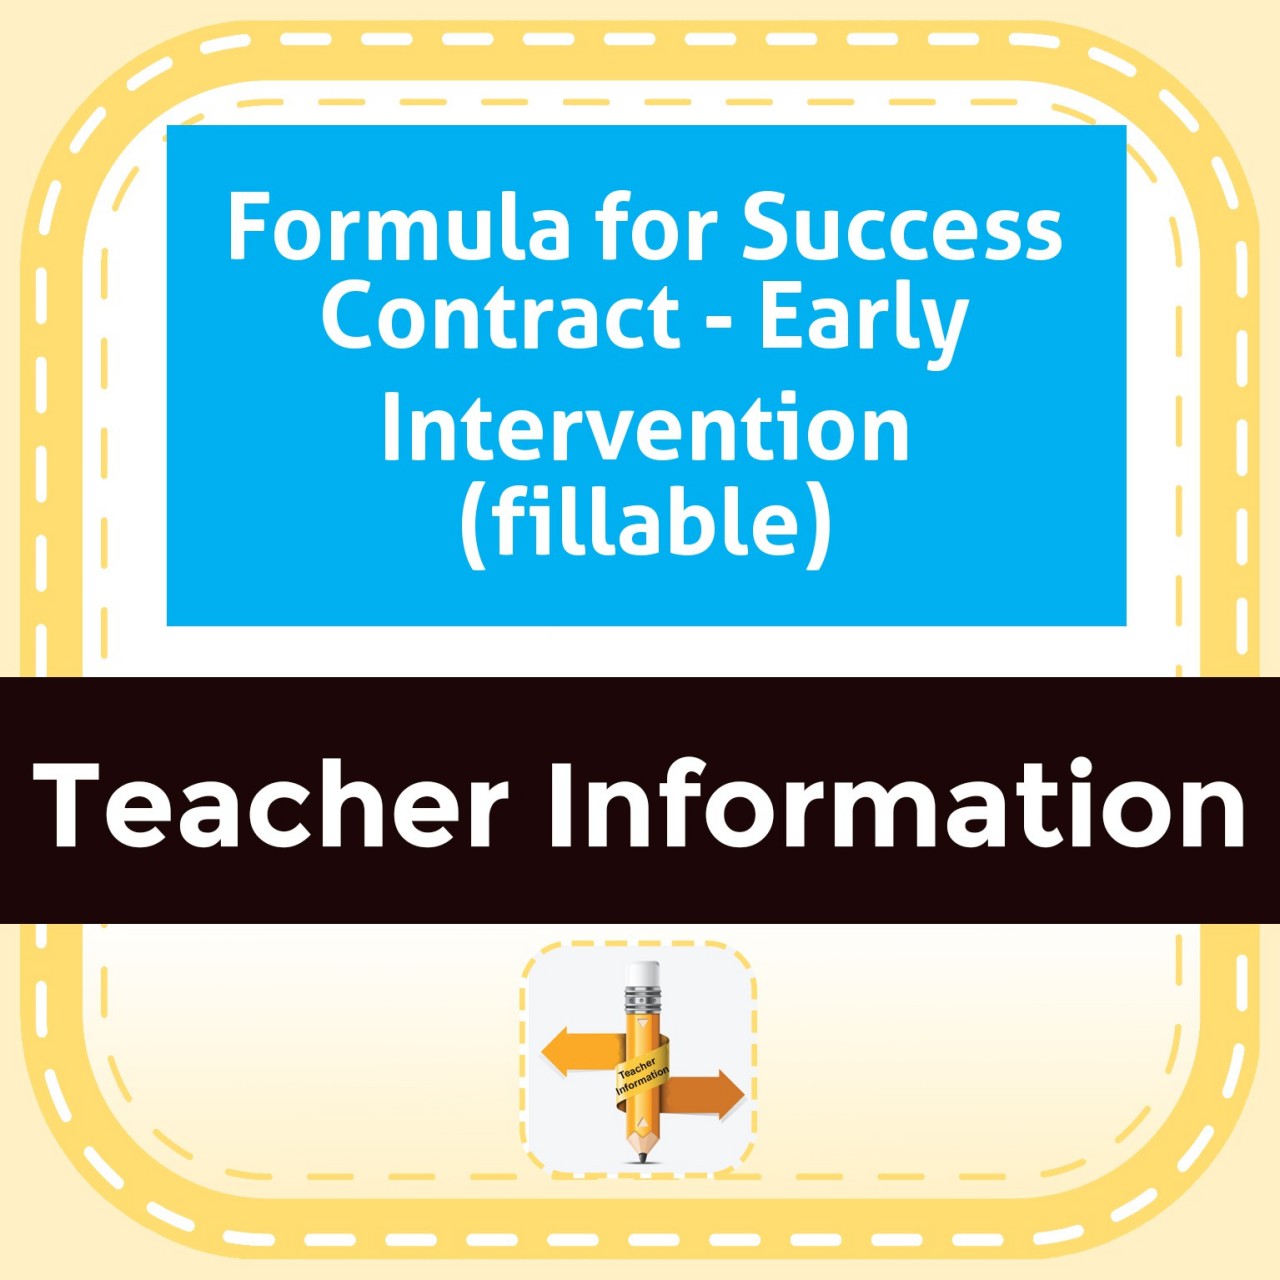 Formula for Success Contract - Early Intervention (fillable)